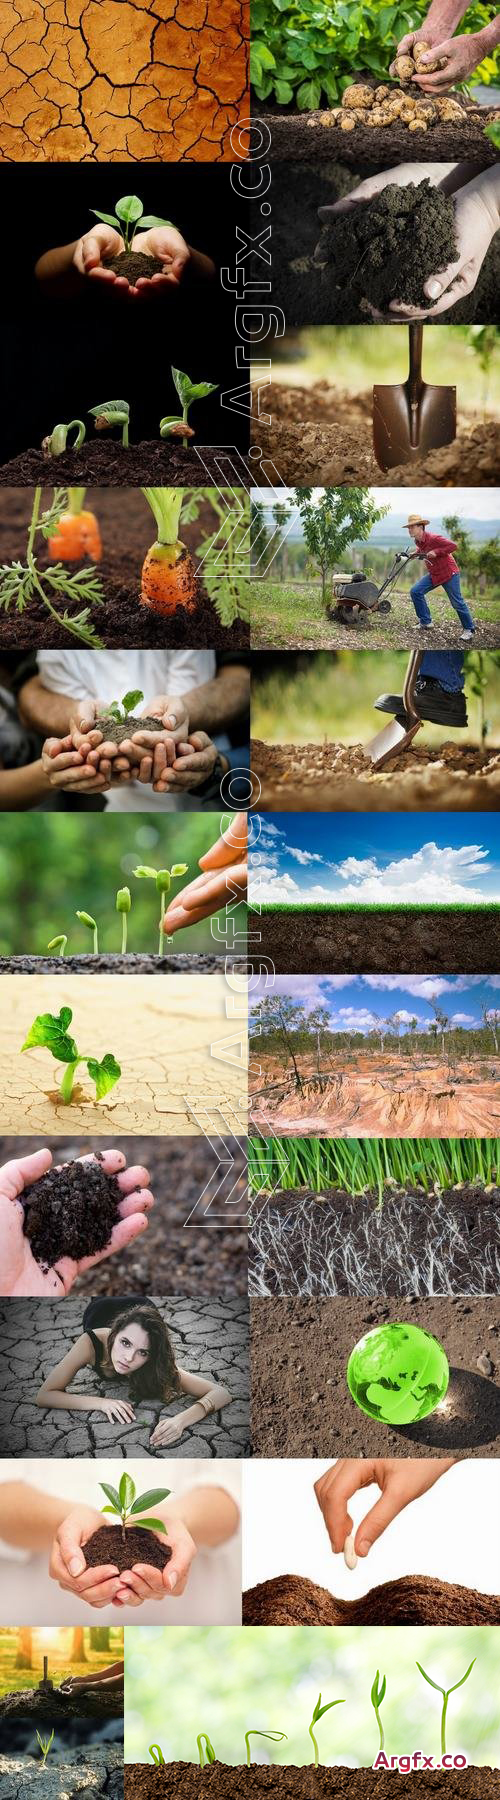 Soil land agriculture plant sprout shoot 25 HQ Jpeg